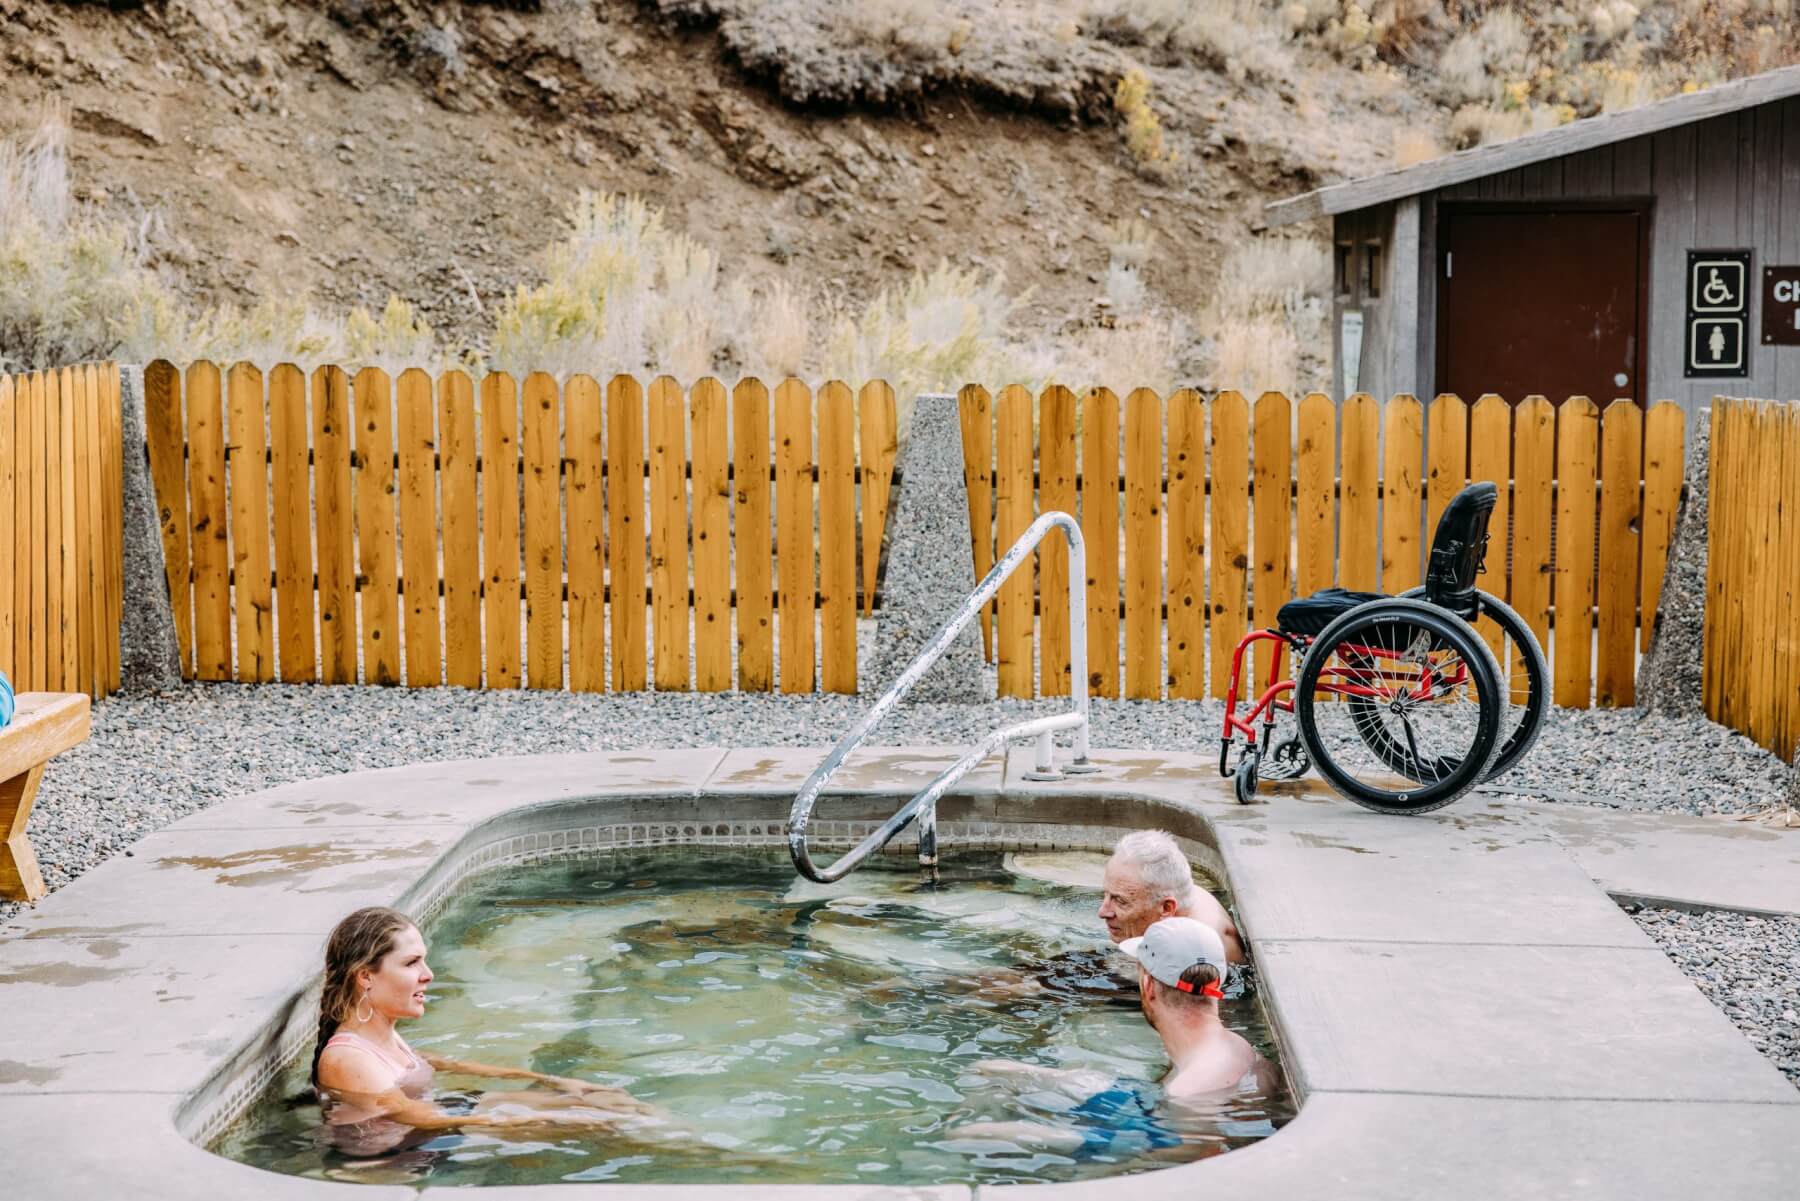 Three people relax in a hot springs pool